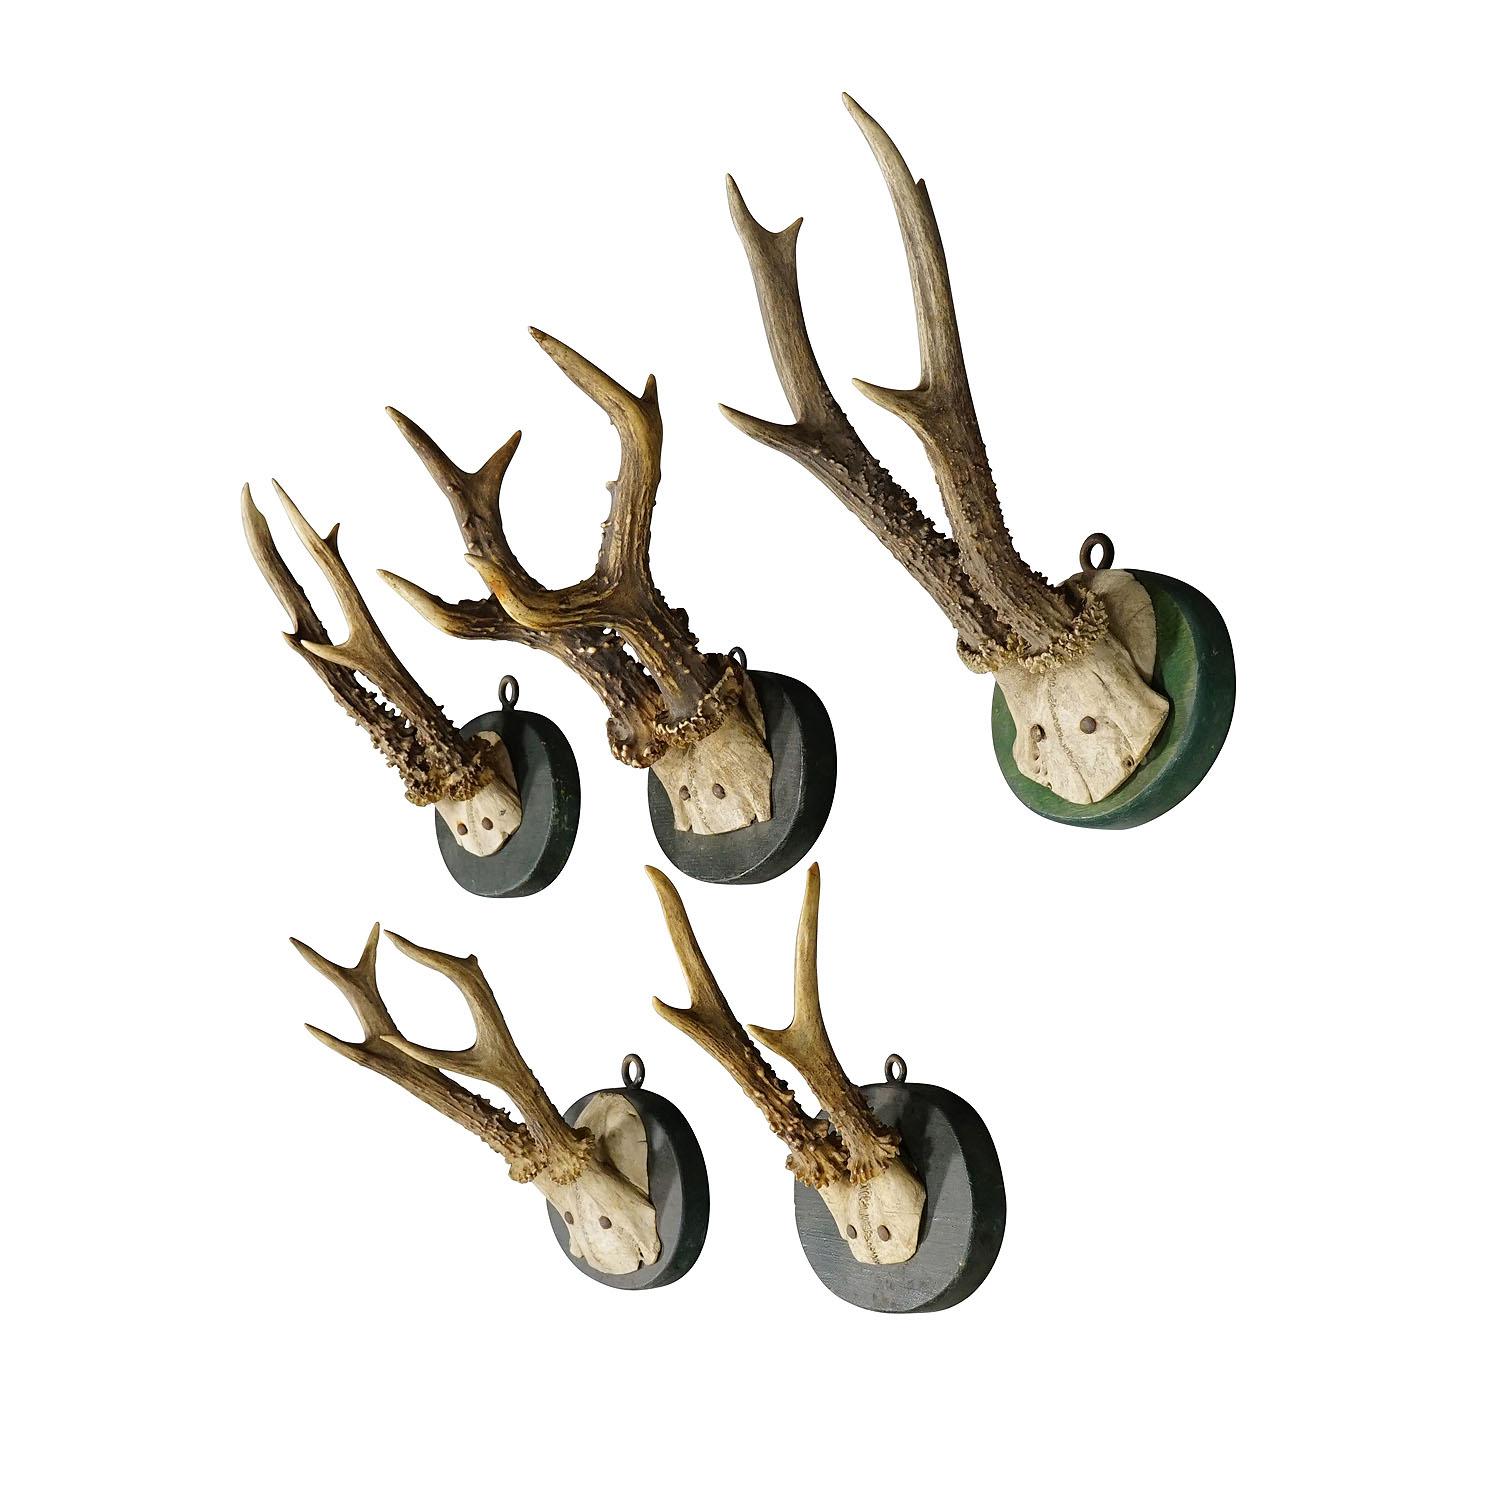 A Set of Five Antique Black Forest Deer Trophies on Wooden Plaques 1880s

A set of five antique Black Forest roe deer (Capreolus capreolus) trophies mounted on turned wooden plaques with a dark green finish. The trophies were shot in Germany in the